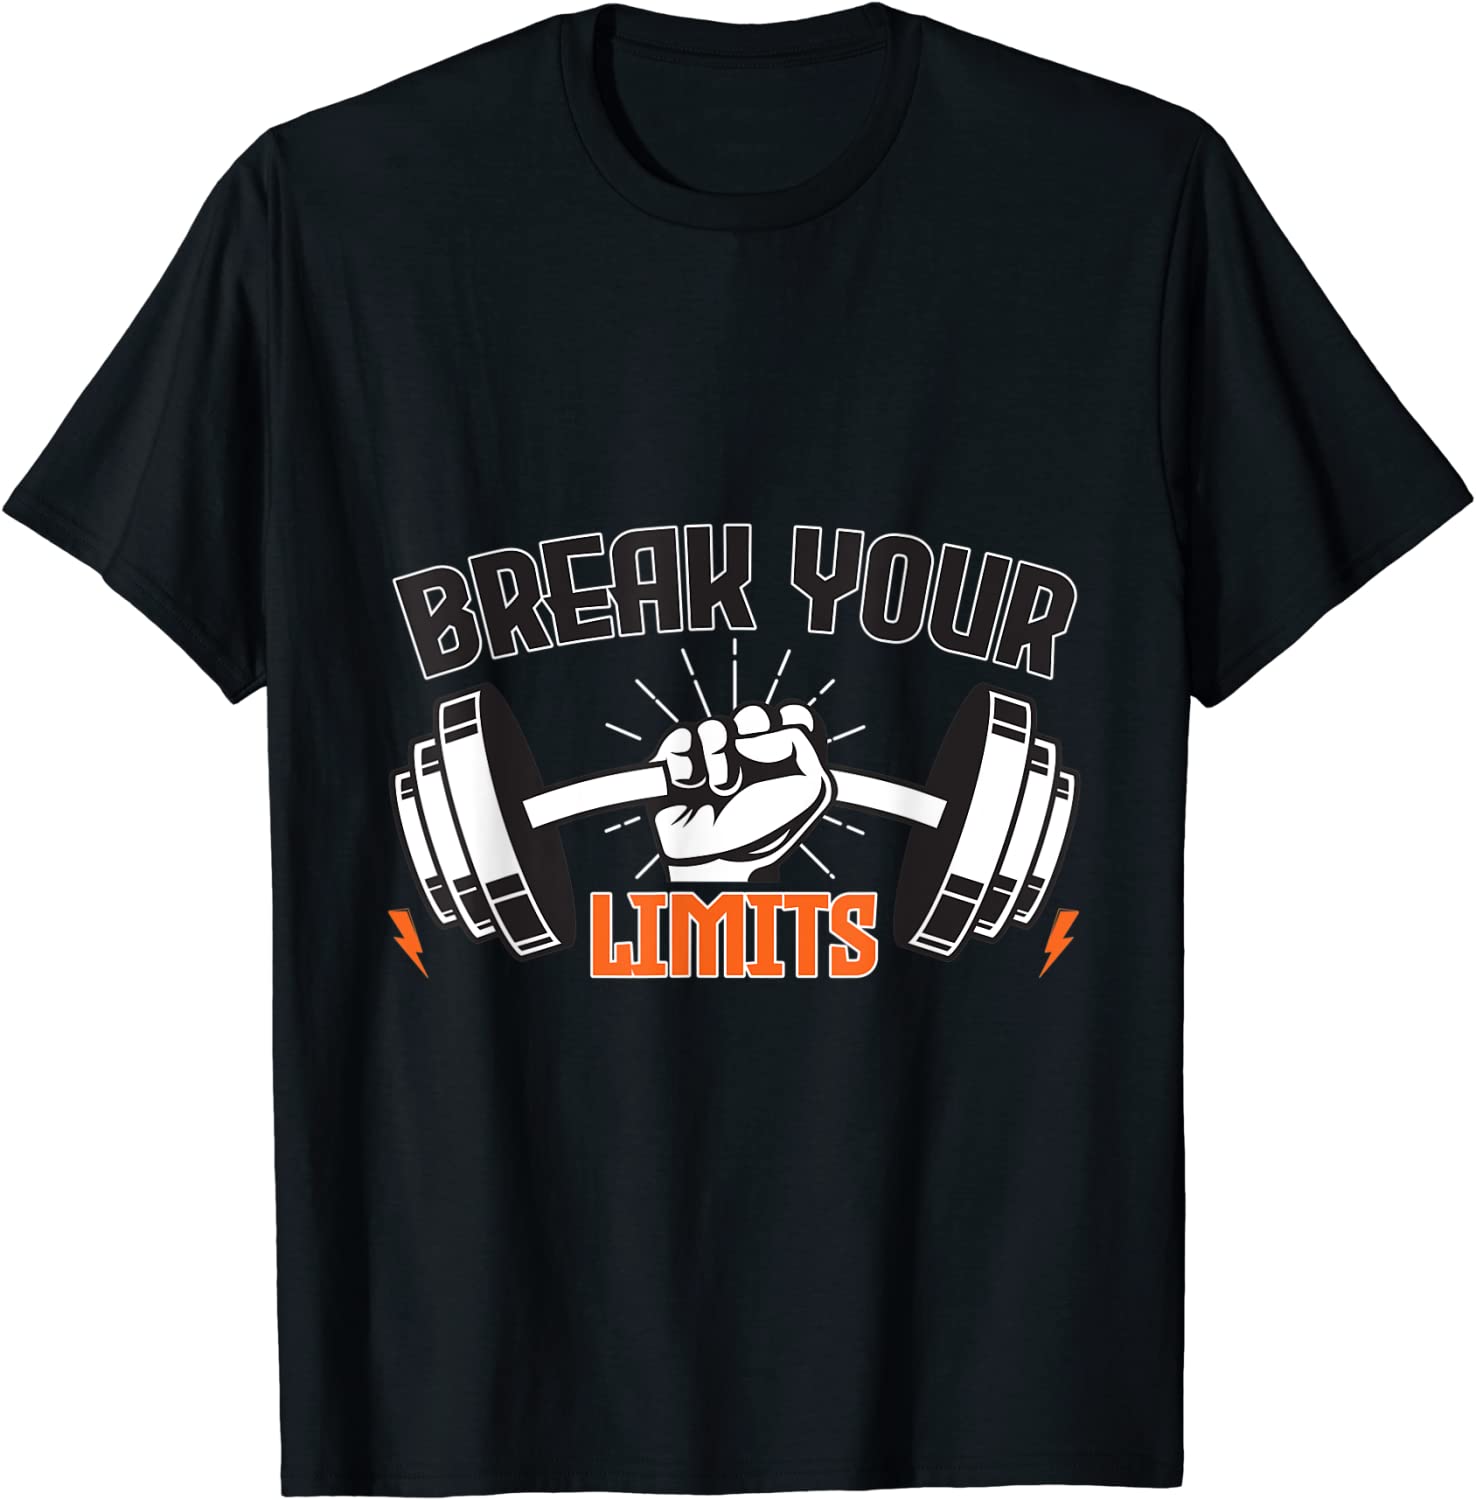 Break Your Limits Fitness and Motivation T-Shirt Best Price